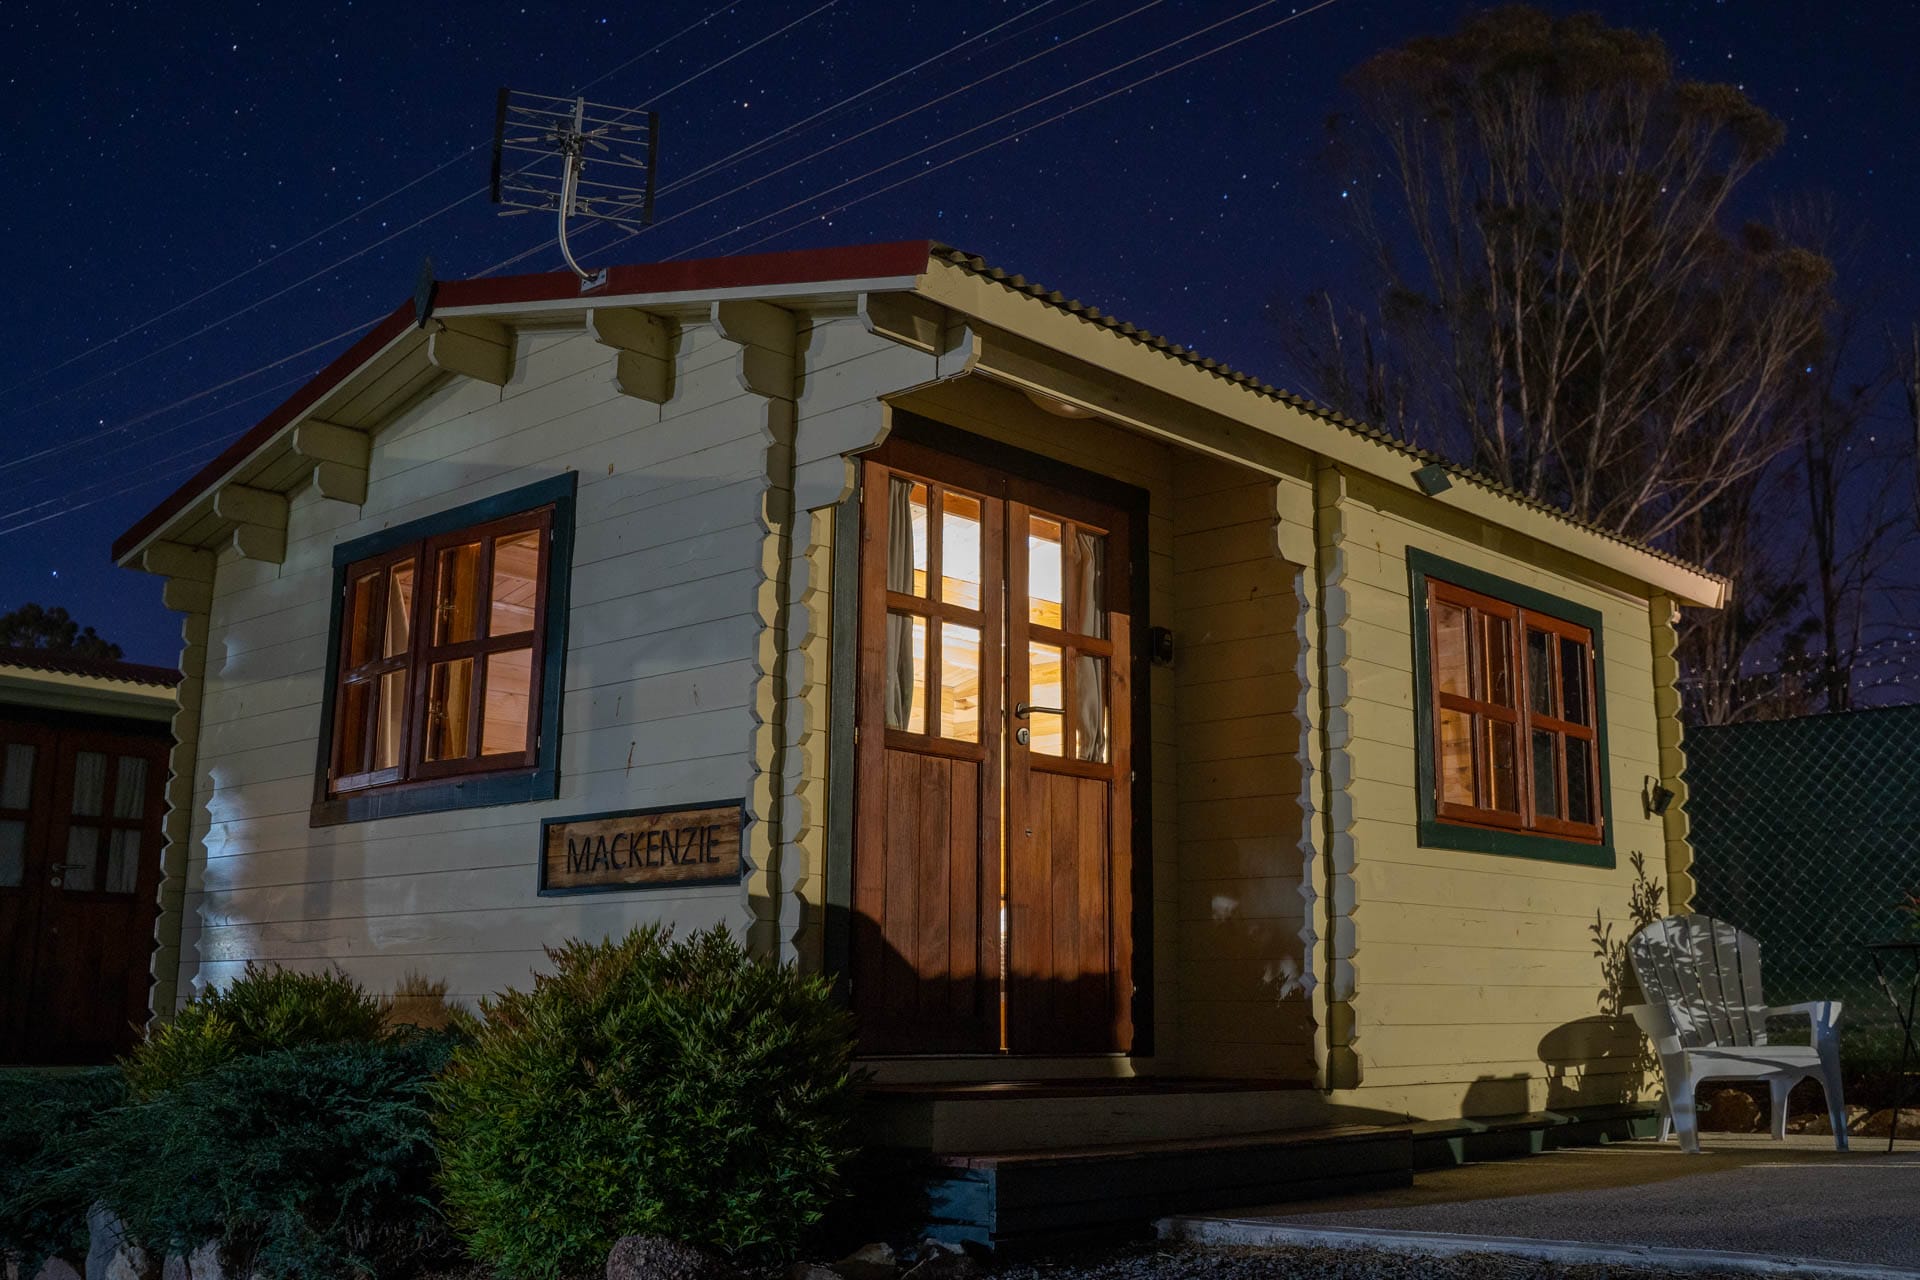 A Weekend in Tenterfield: Where to Stay, Adventure, and Eat, constance allan, lodge, cabin at night